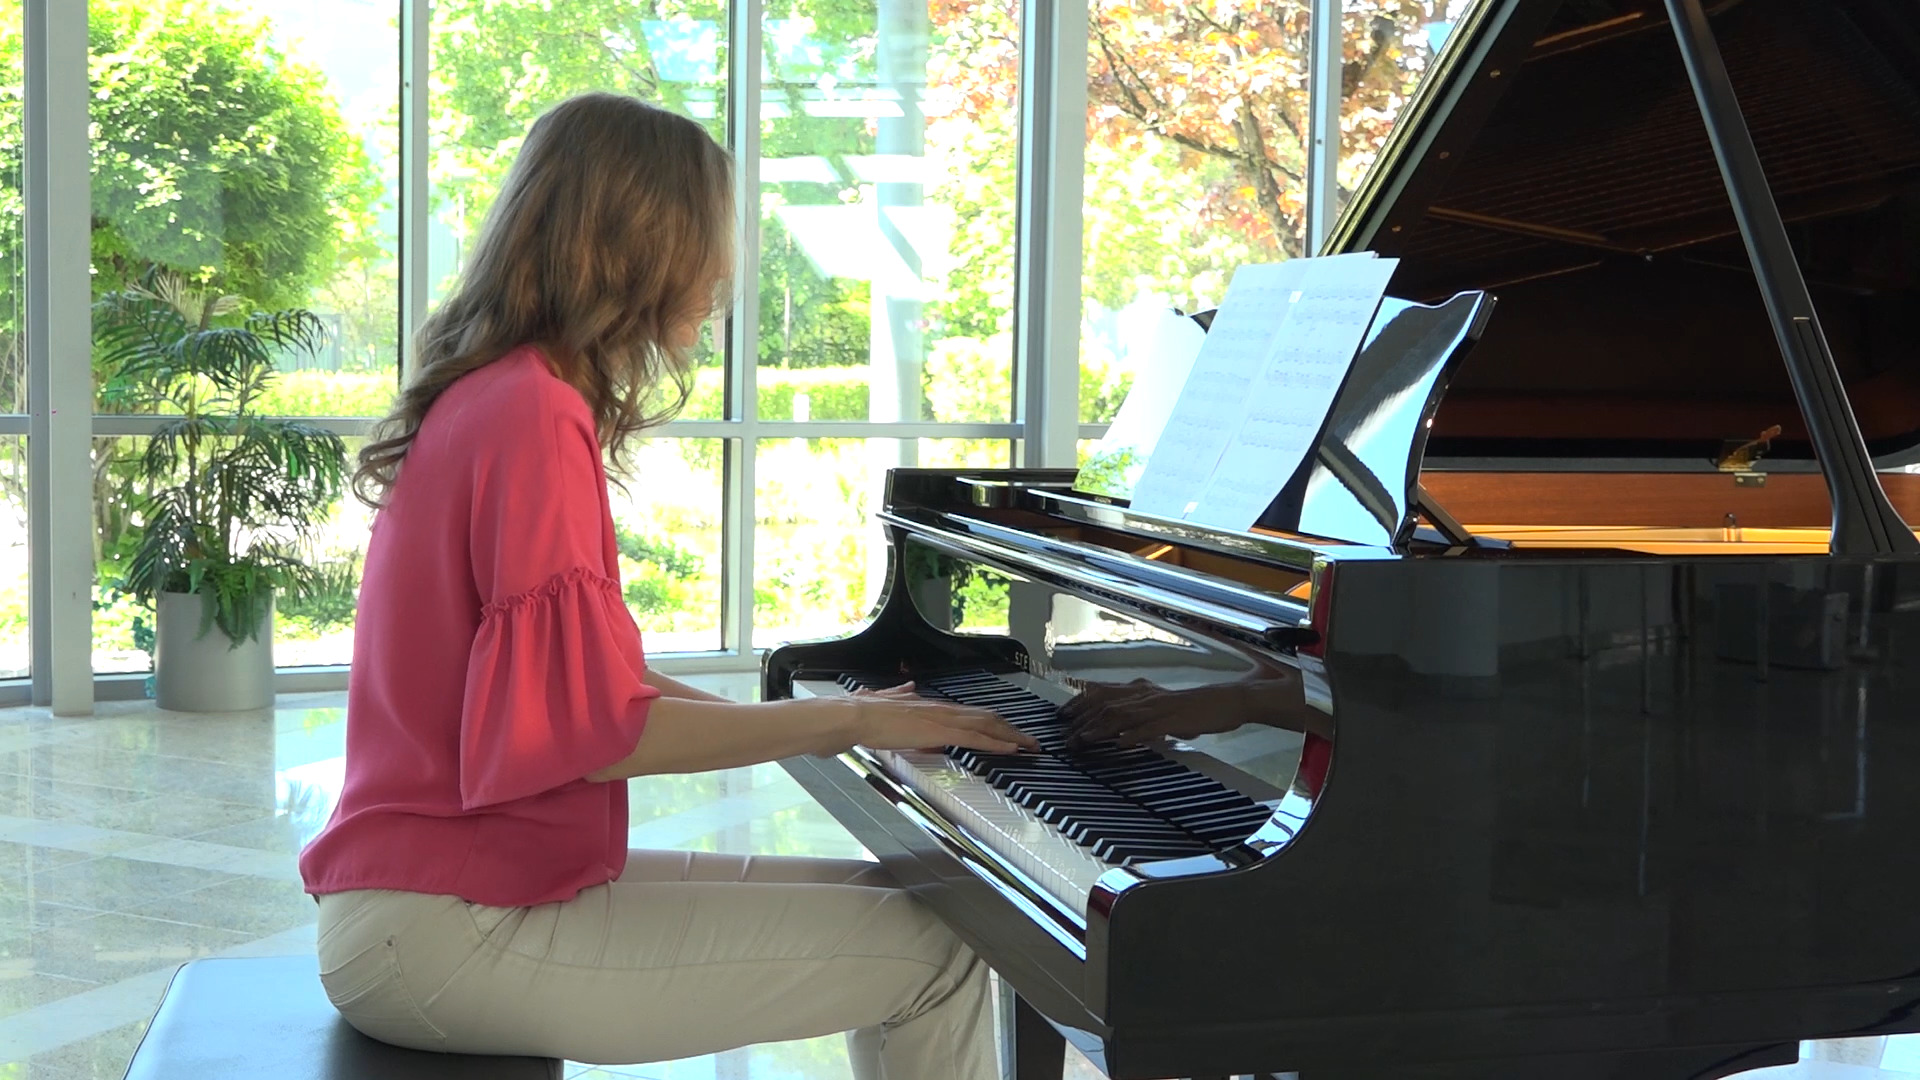 Anna Sutyagina plays the original composition by UK composer Alex Rimes, it is going to be the collection of etudes for intermediate players. Johann Sebastian Bach and his “well-tempered clavier” has been the source of inspiration for the composition “Etude” of Alex Rimes. A welcome stimulation and balance for mind and soul.